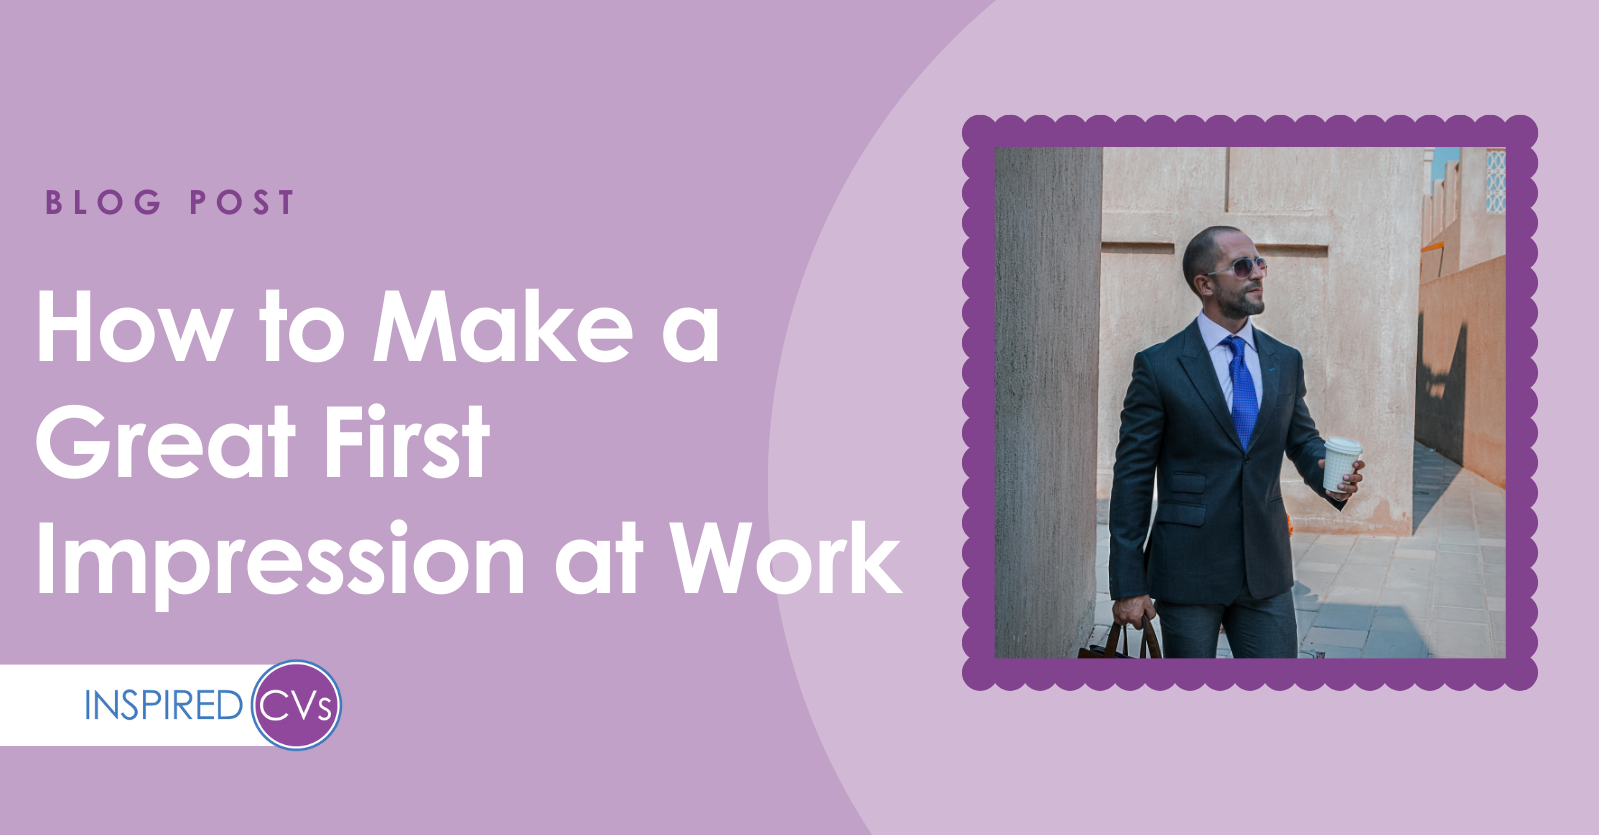 How to Make a Good First Impression at Work